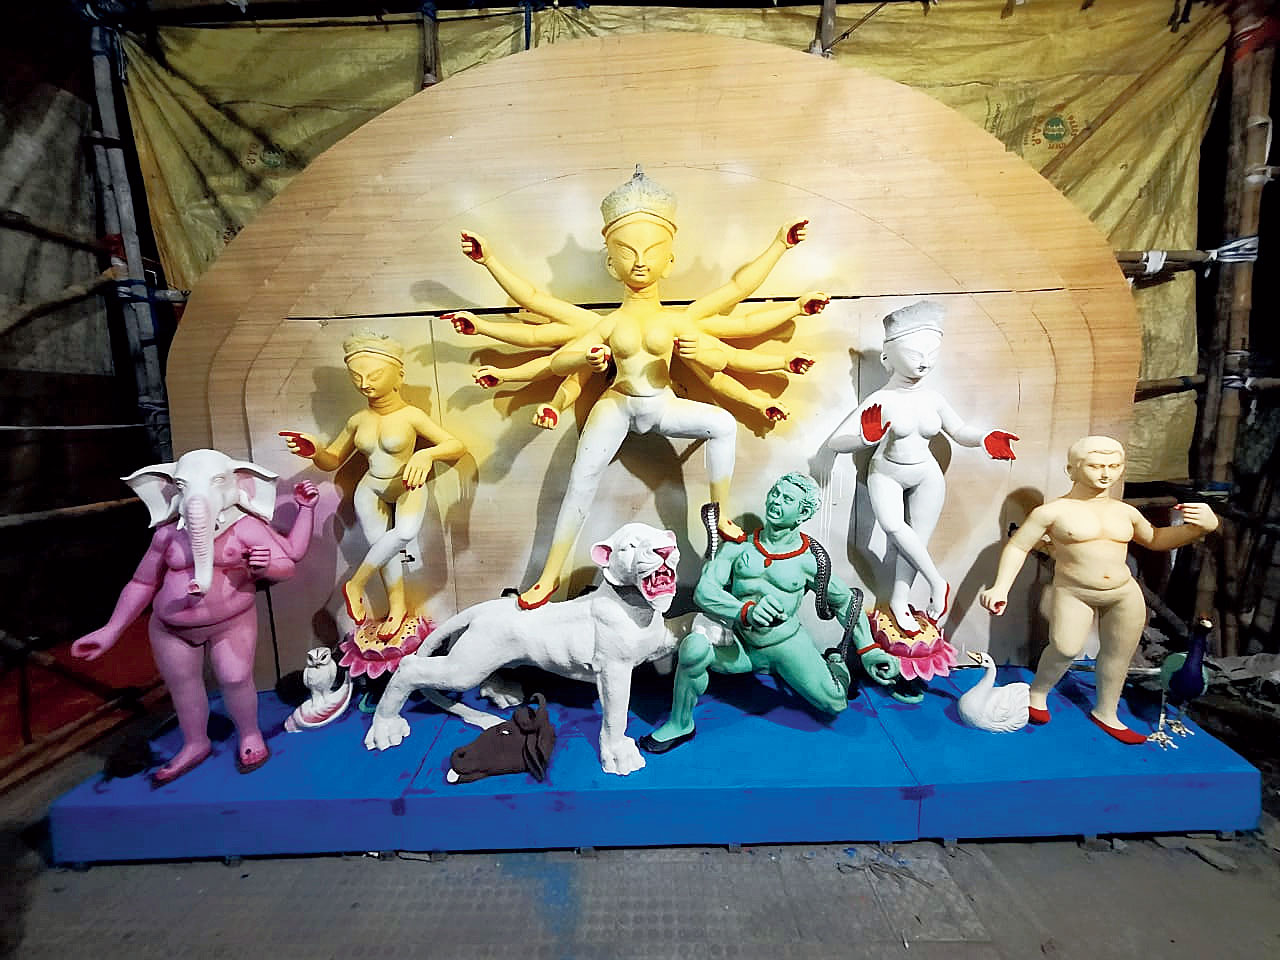 The AE (Part 2) idol is being sculpted in the block as visiting Kumartuli repeatedly was considered unsafe